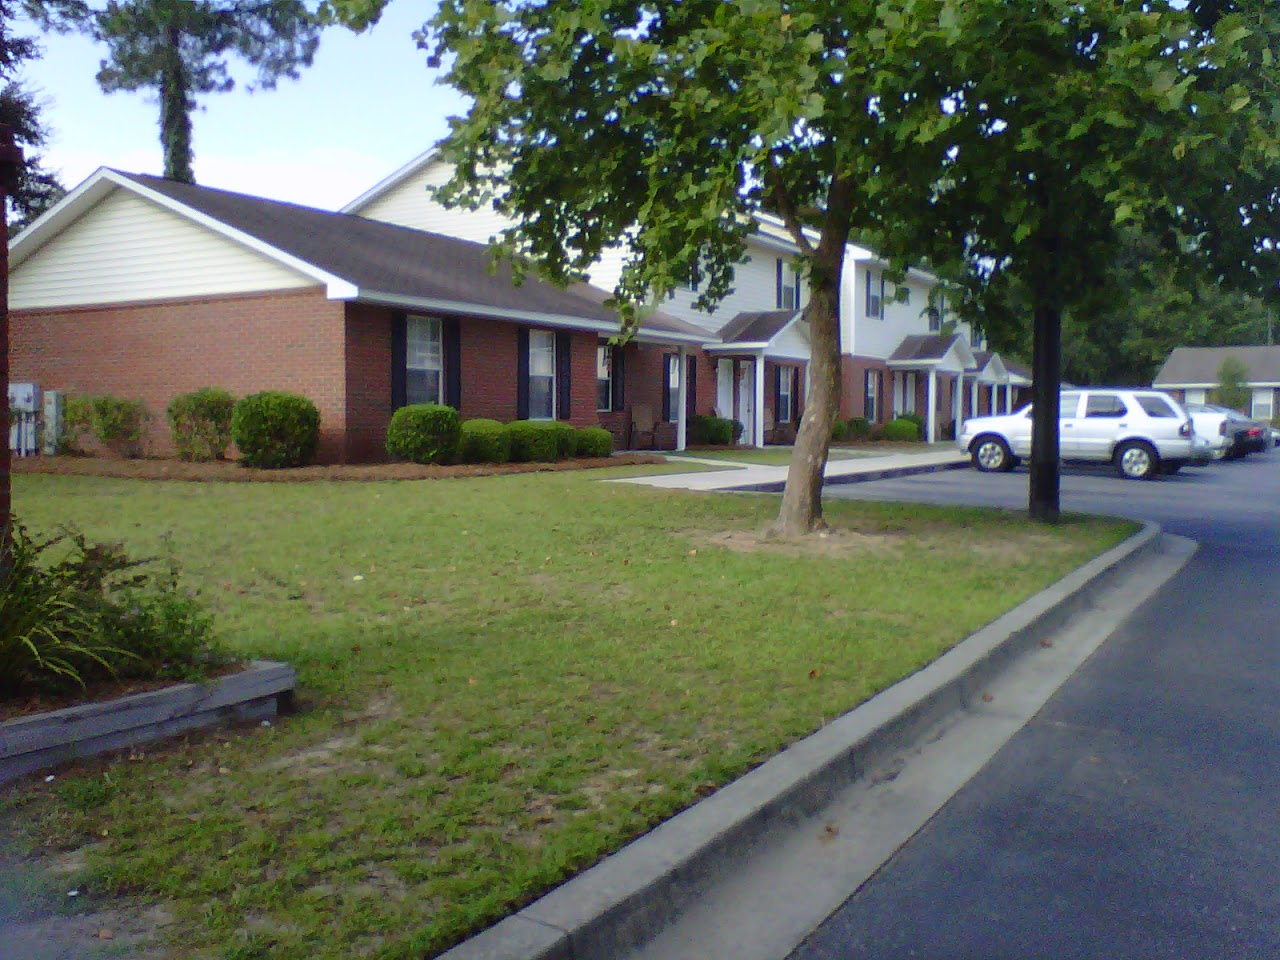 Photo of ARBOR TRACE II APARTMENTS. Affordable housing located at 4700 ROLLING PINE DR LAKE PARK, GA 31636